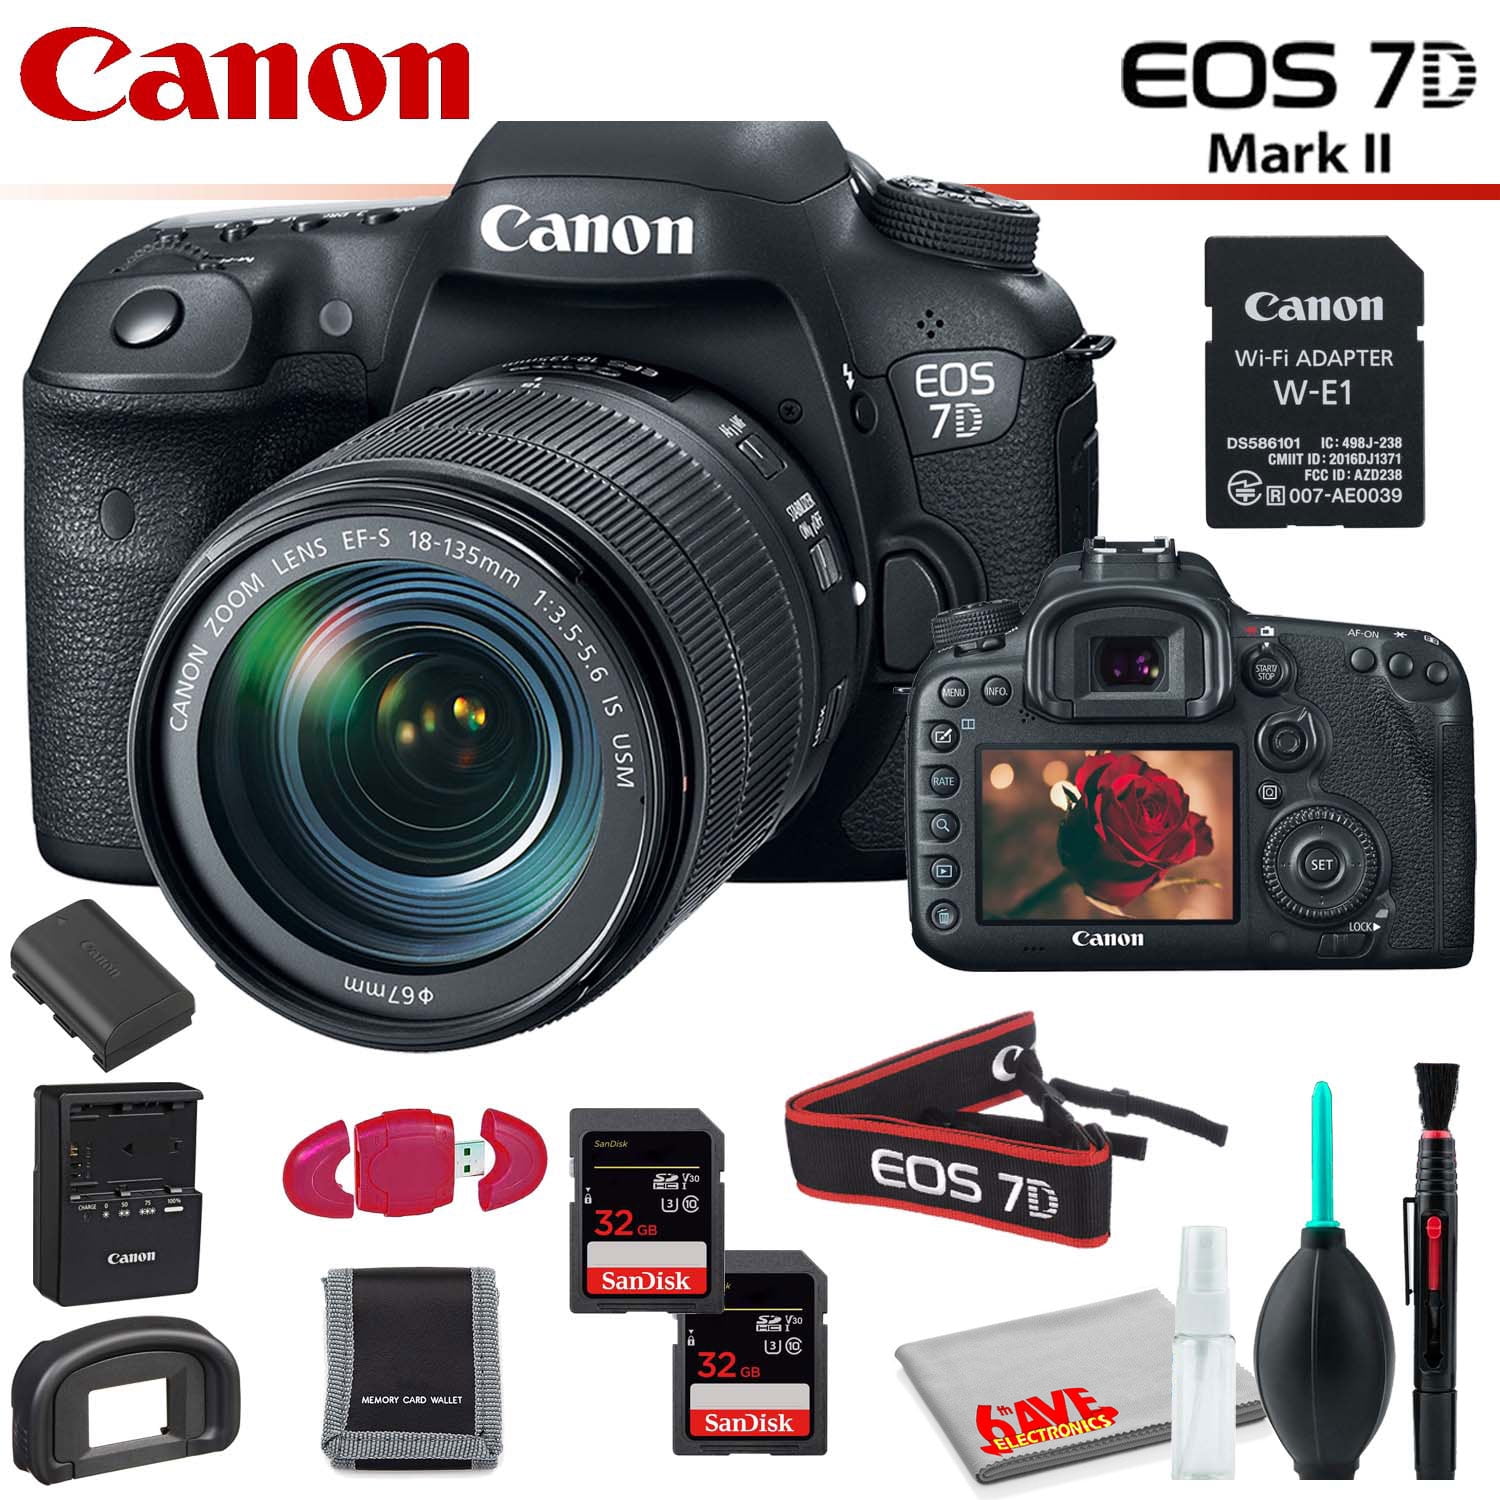 Canon EOS II DSLR Camera (Intl Model) with 18-135mm Lens & W-E1 Wi-Fi Adapter With Memory Card Kit and Kit - Walmart.com